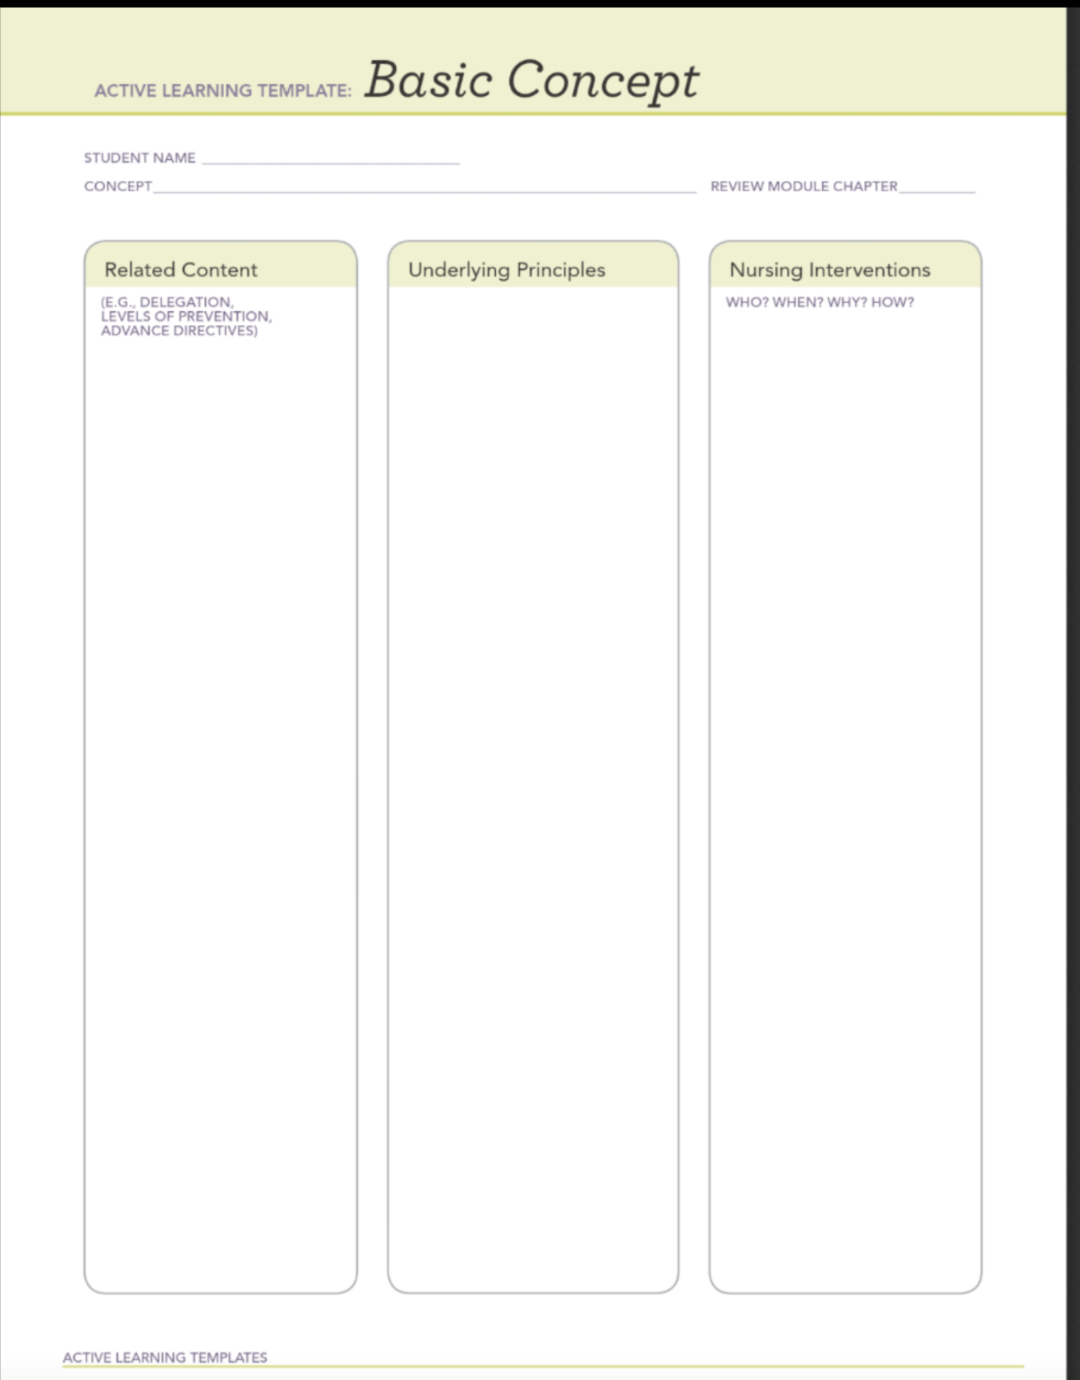 Active Learning Template Basic Concept Printable Form, Templates and